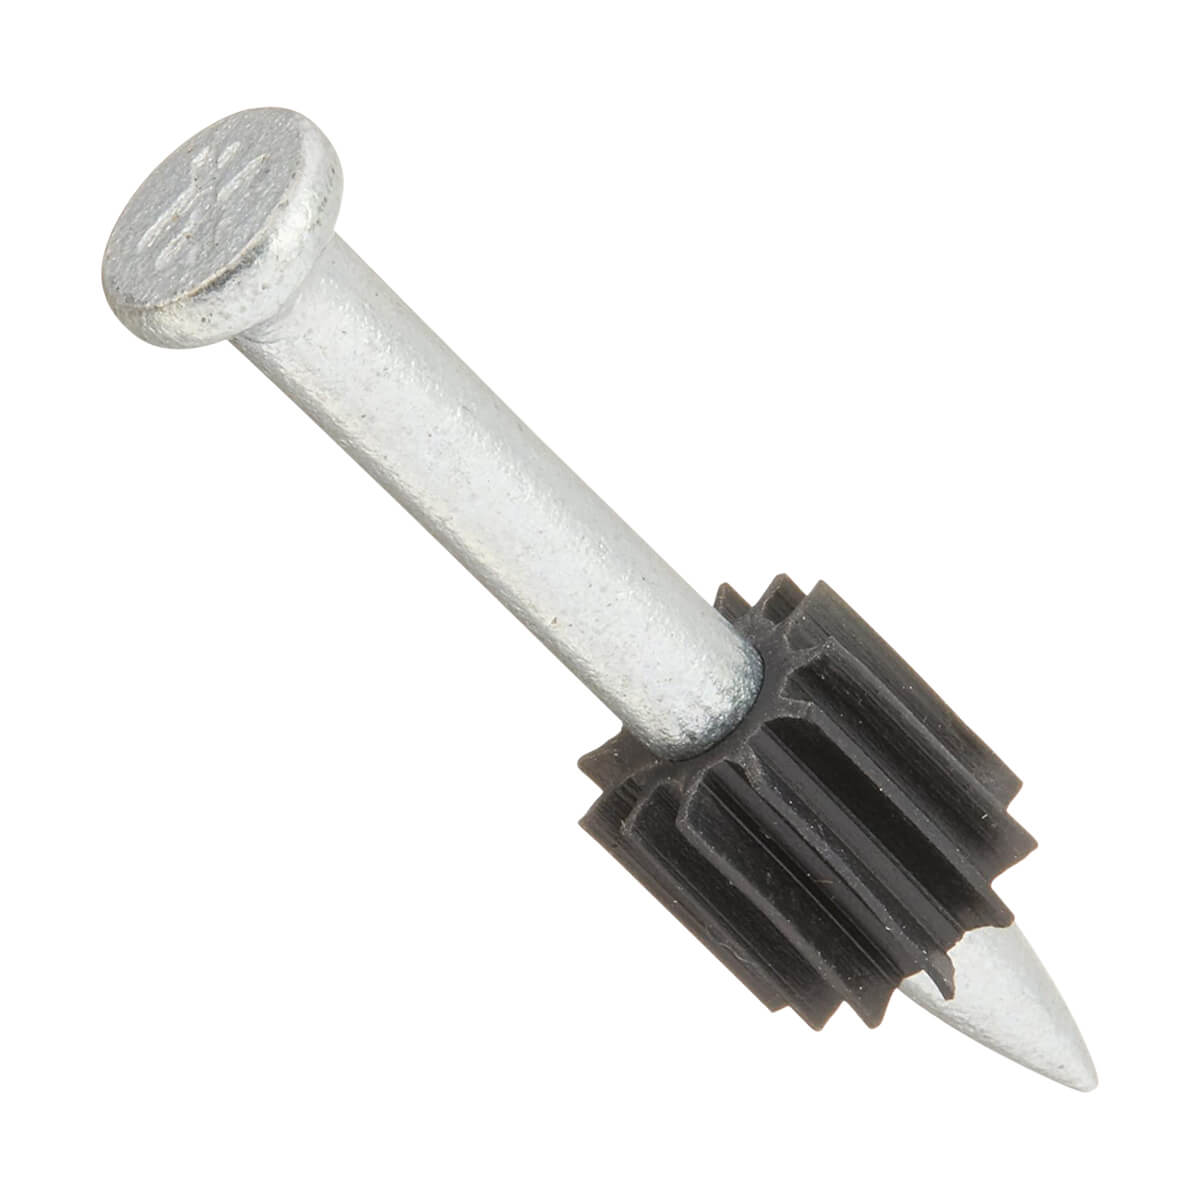 Powder Actuated Pins - 1 1/2-in - 100 Pack